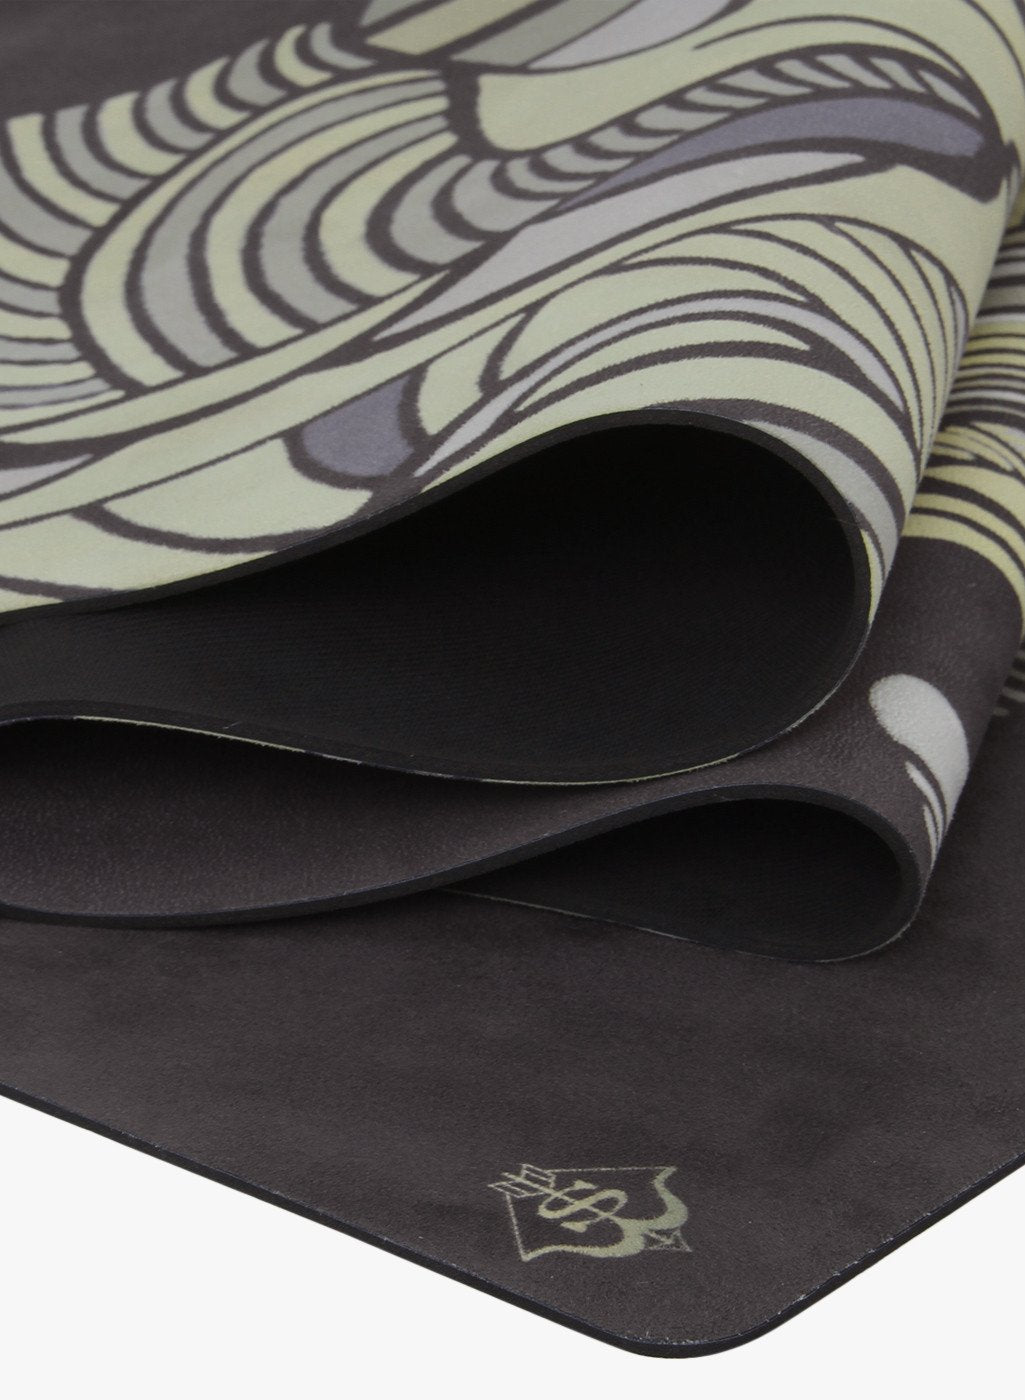 Indulge in luxury with our Elephant-Inspired Yoga Mat. Crafted from natural tree rubber and recycled plastic bottles, this mat combines opulence with eco-friendliness. Elevate your practice in style.